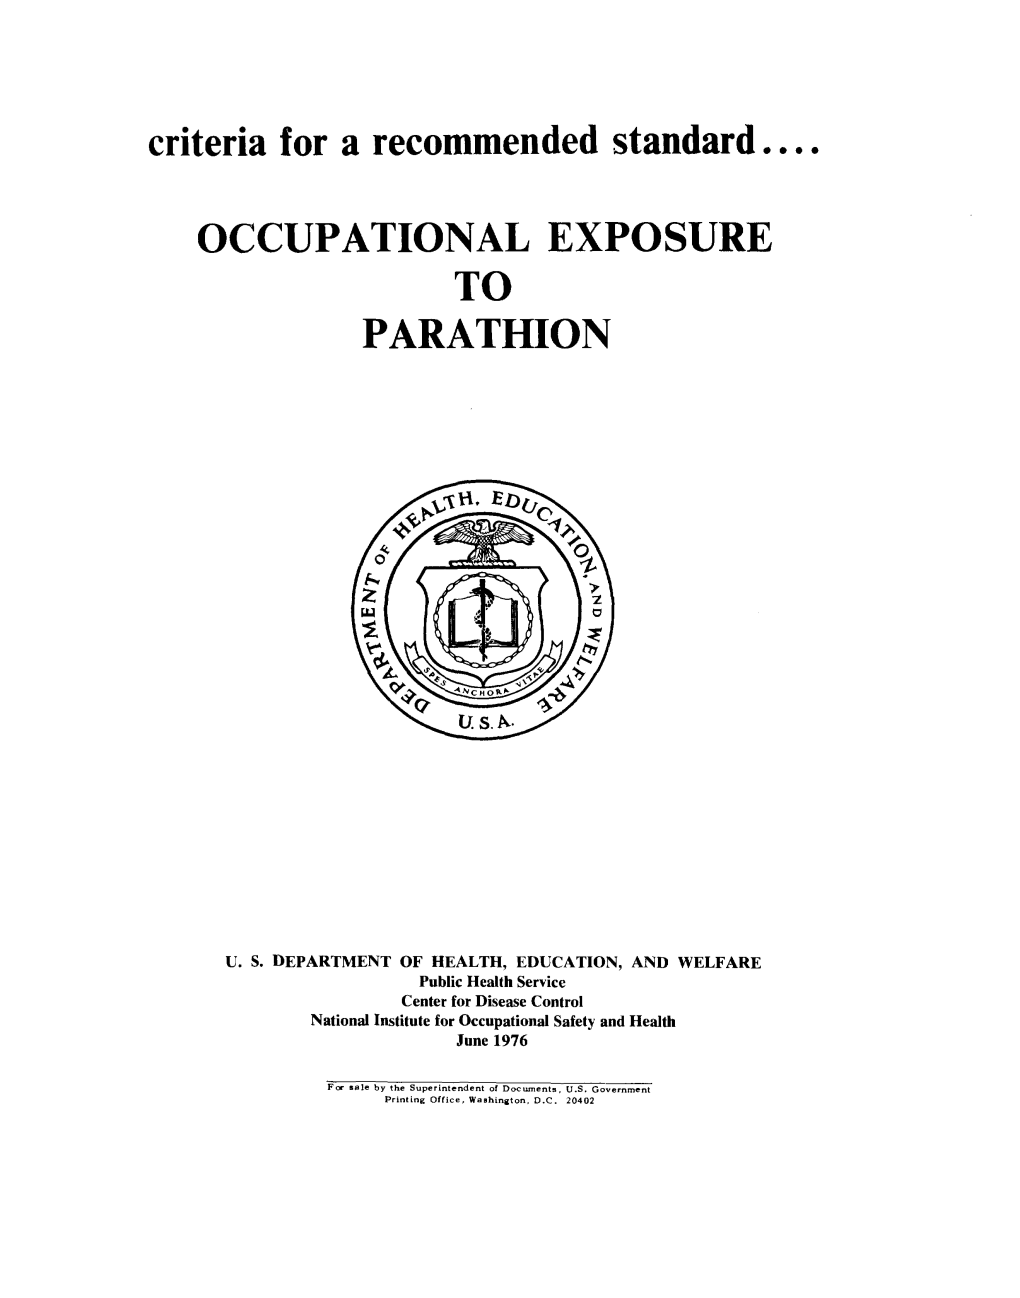 Occupational Exposure to Parathion